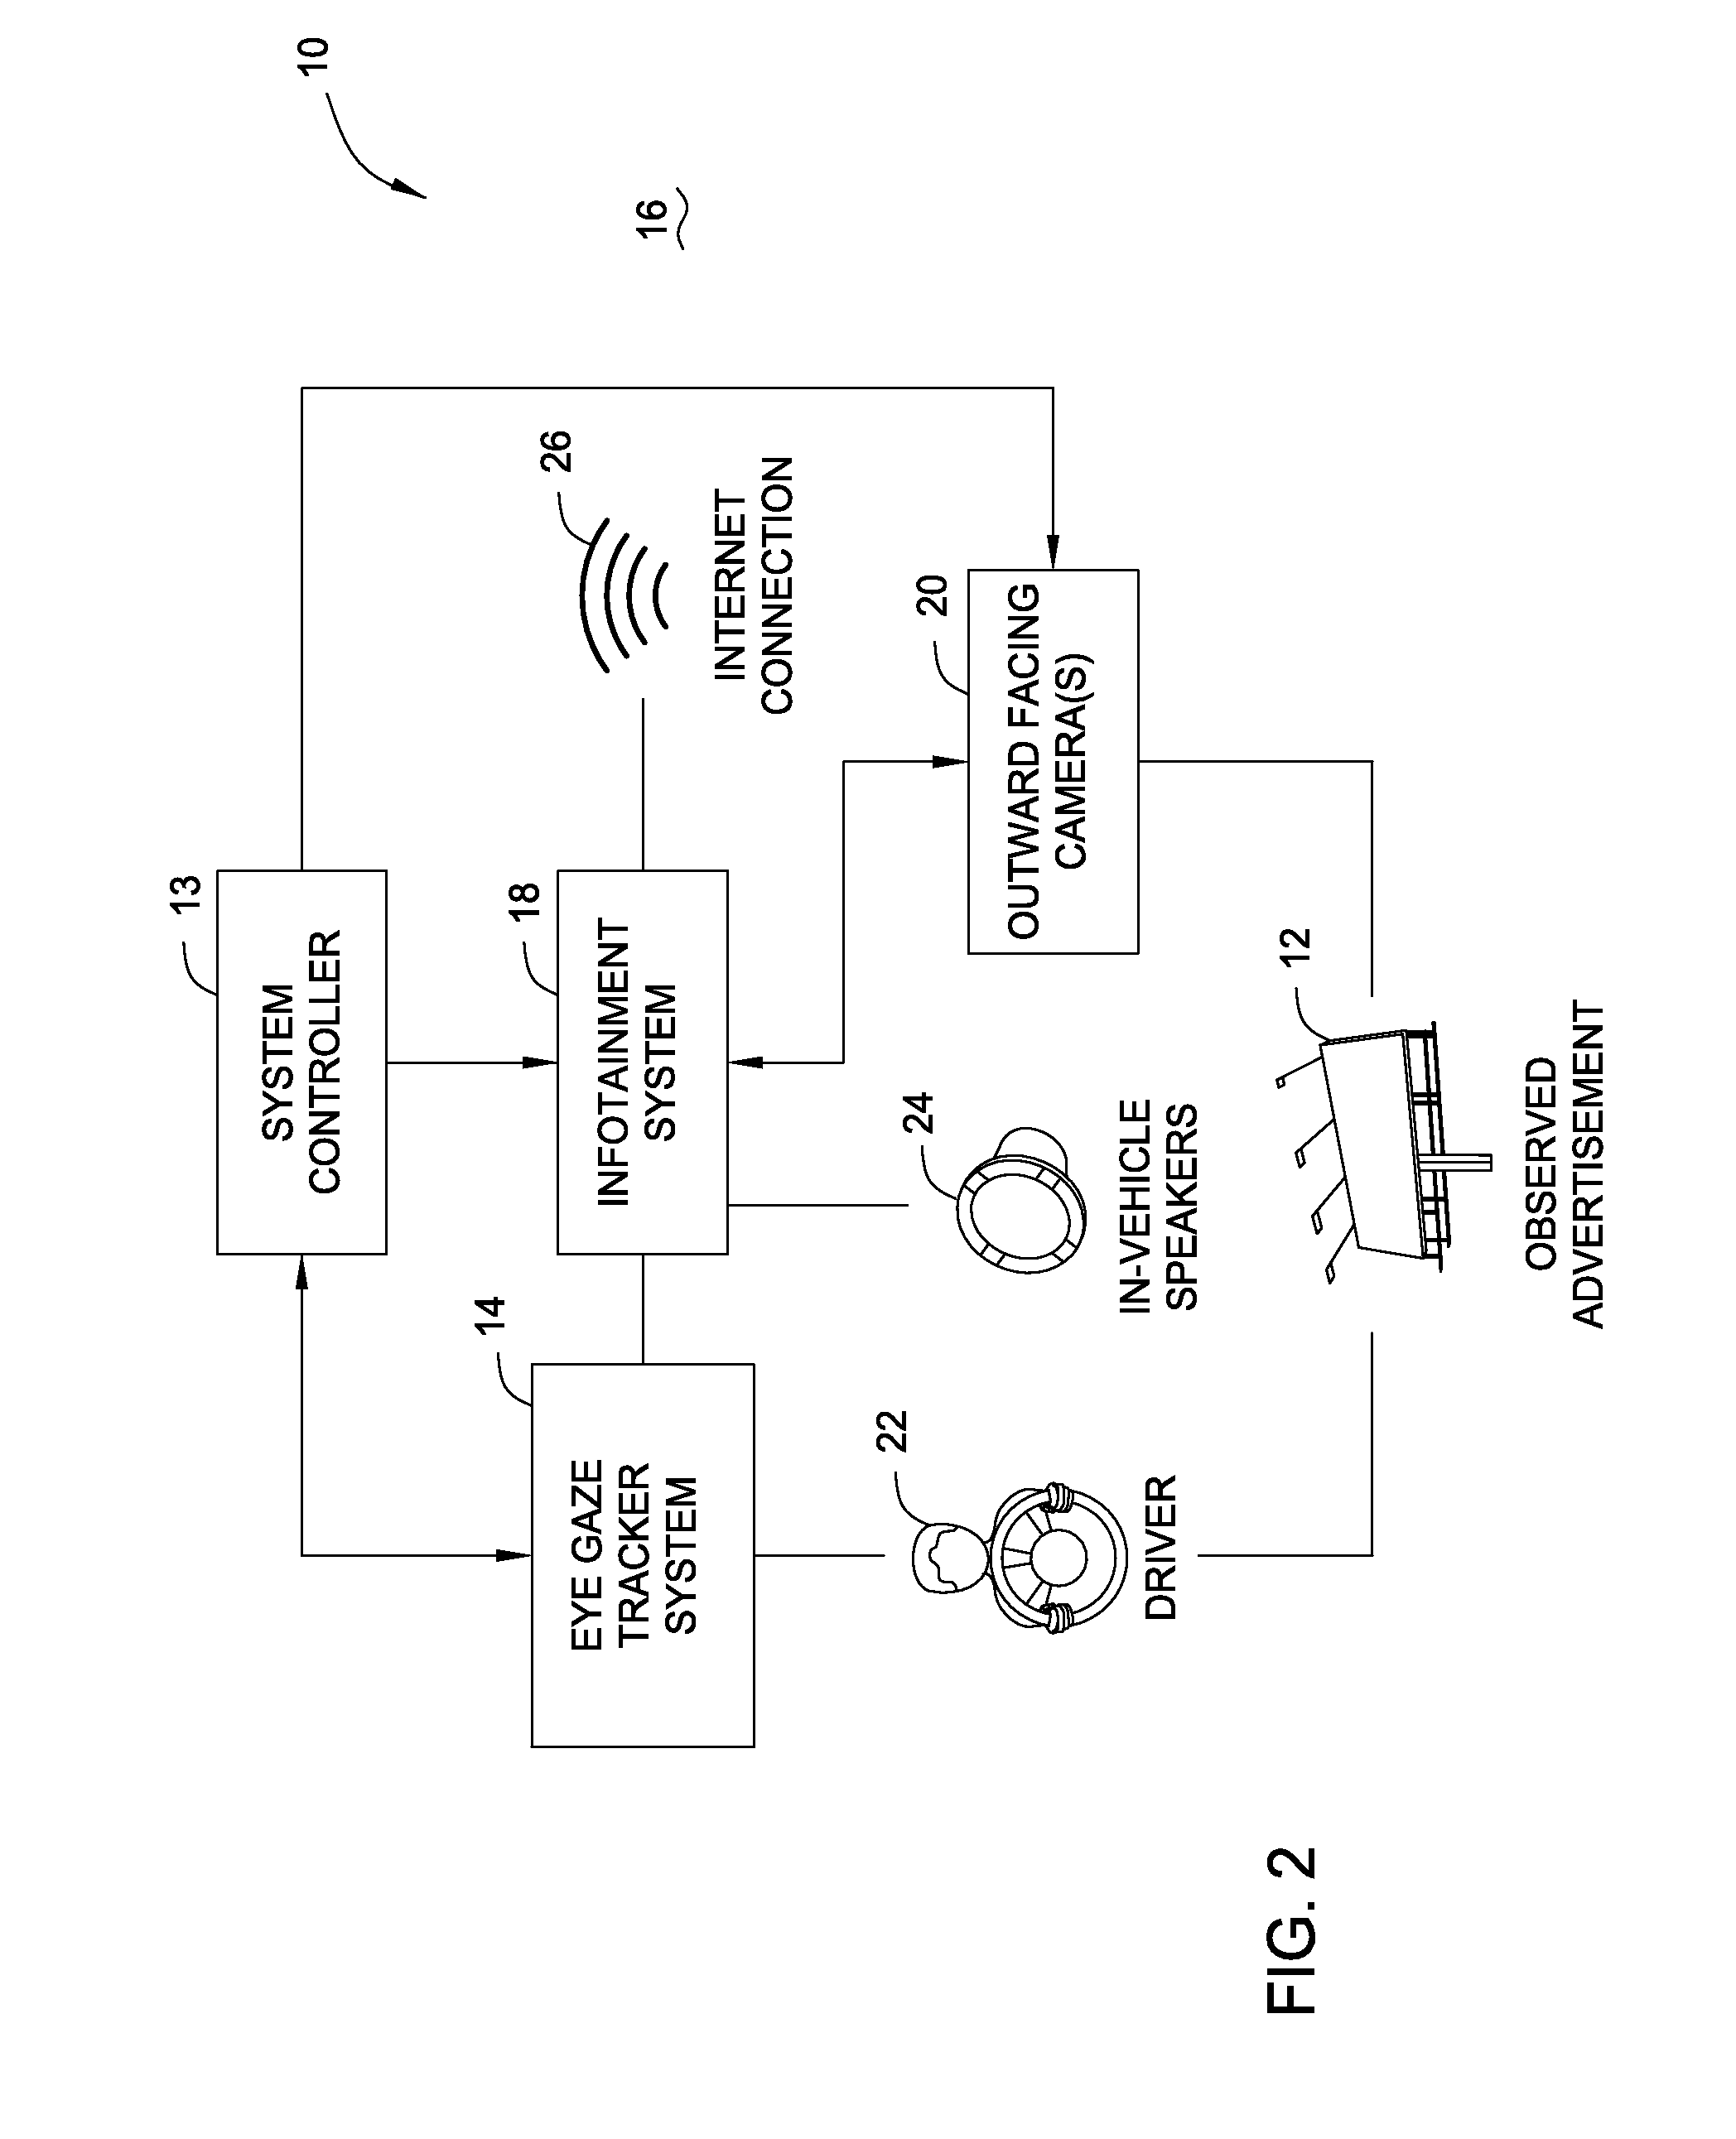 Apparatus and method for detecting a driver's interest in an advertisement by tracking driver eye gaze